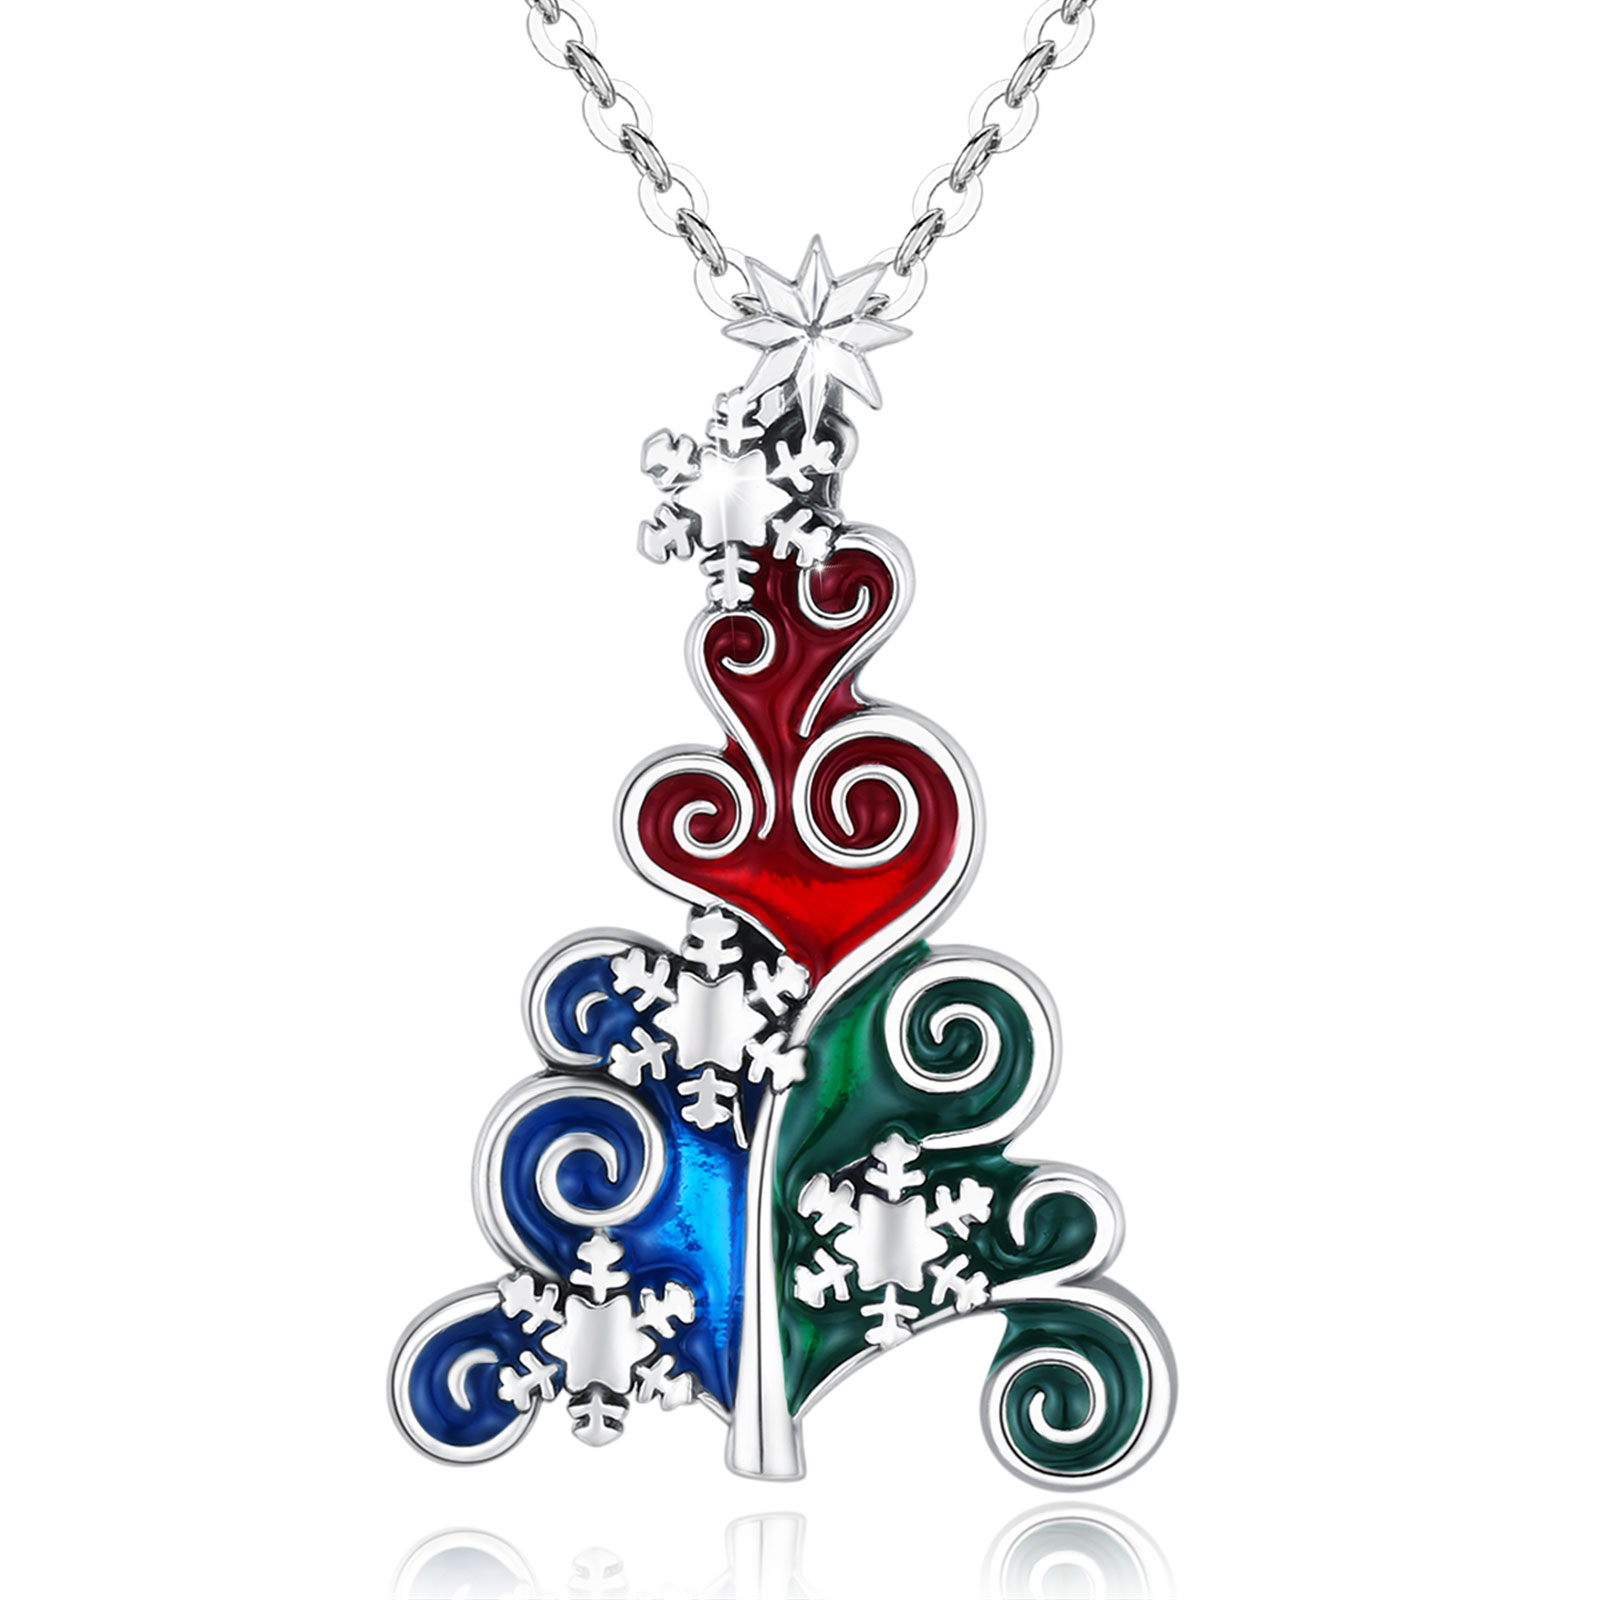 Merryshine Fashion trending S925 Sterling Silver Colorful Christmas Tree Necklace for Christmas Present